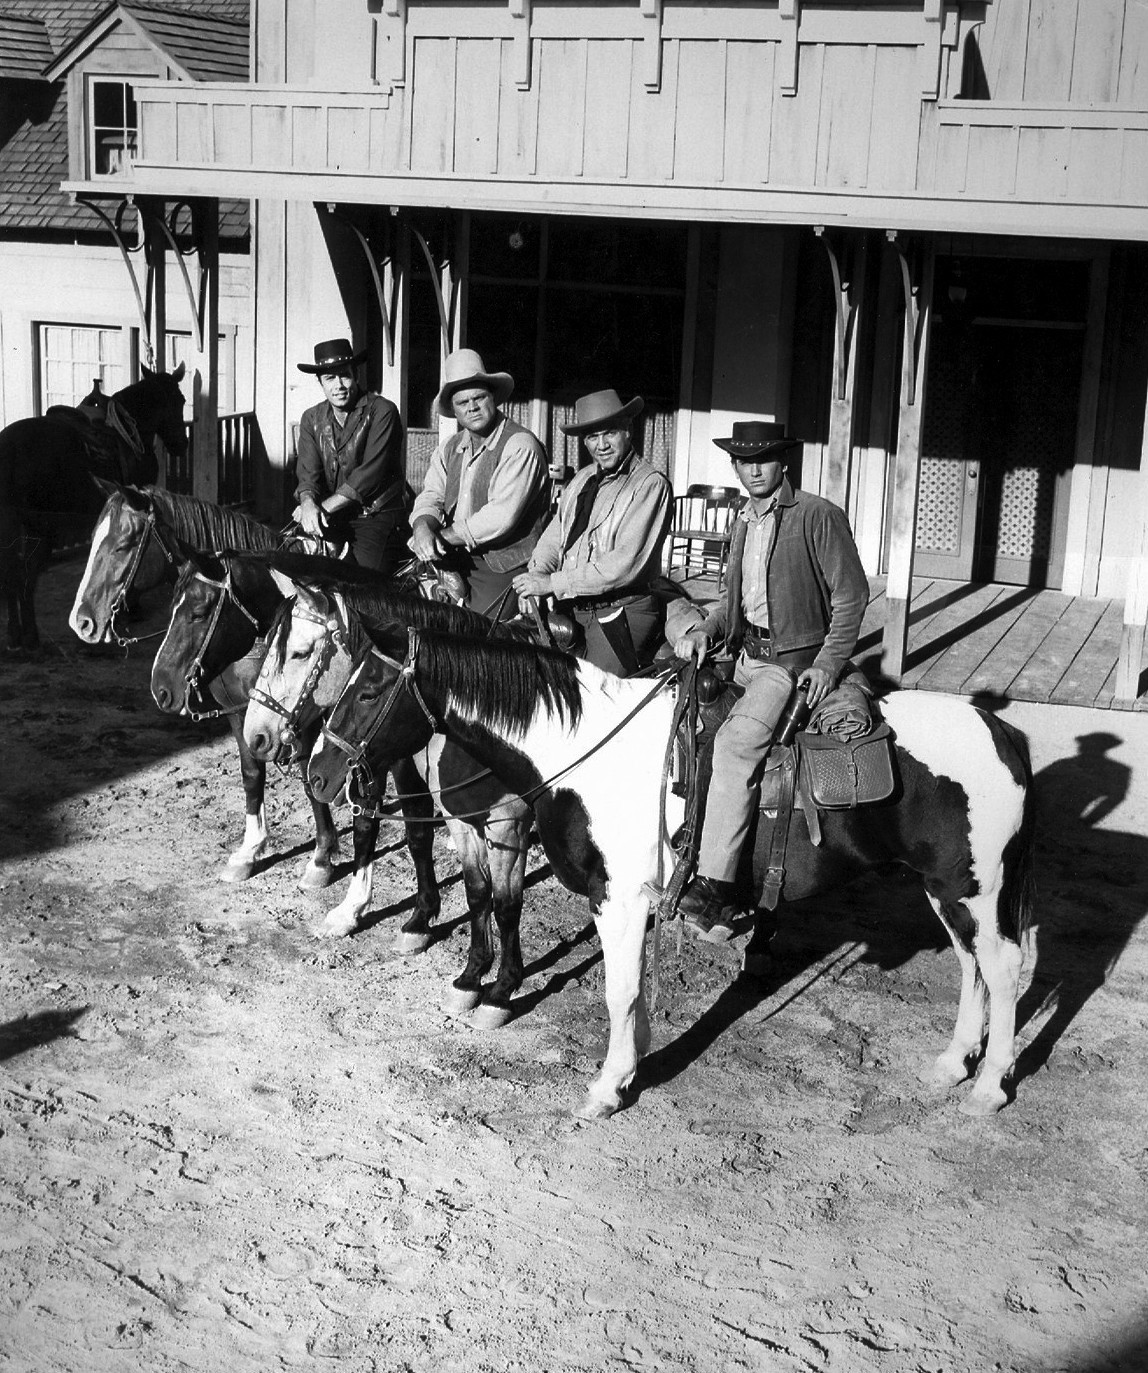 A black and white photograph of men mounted on horses in front of a building